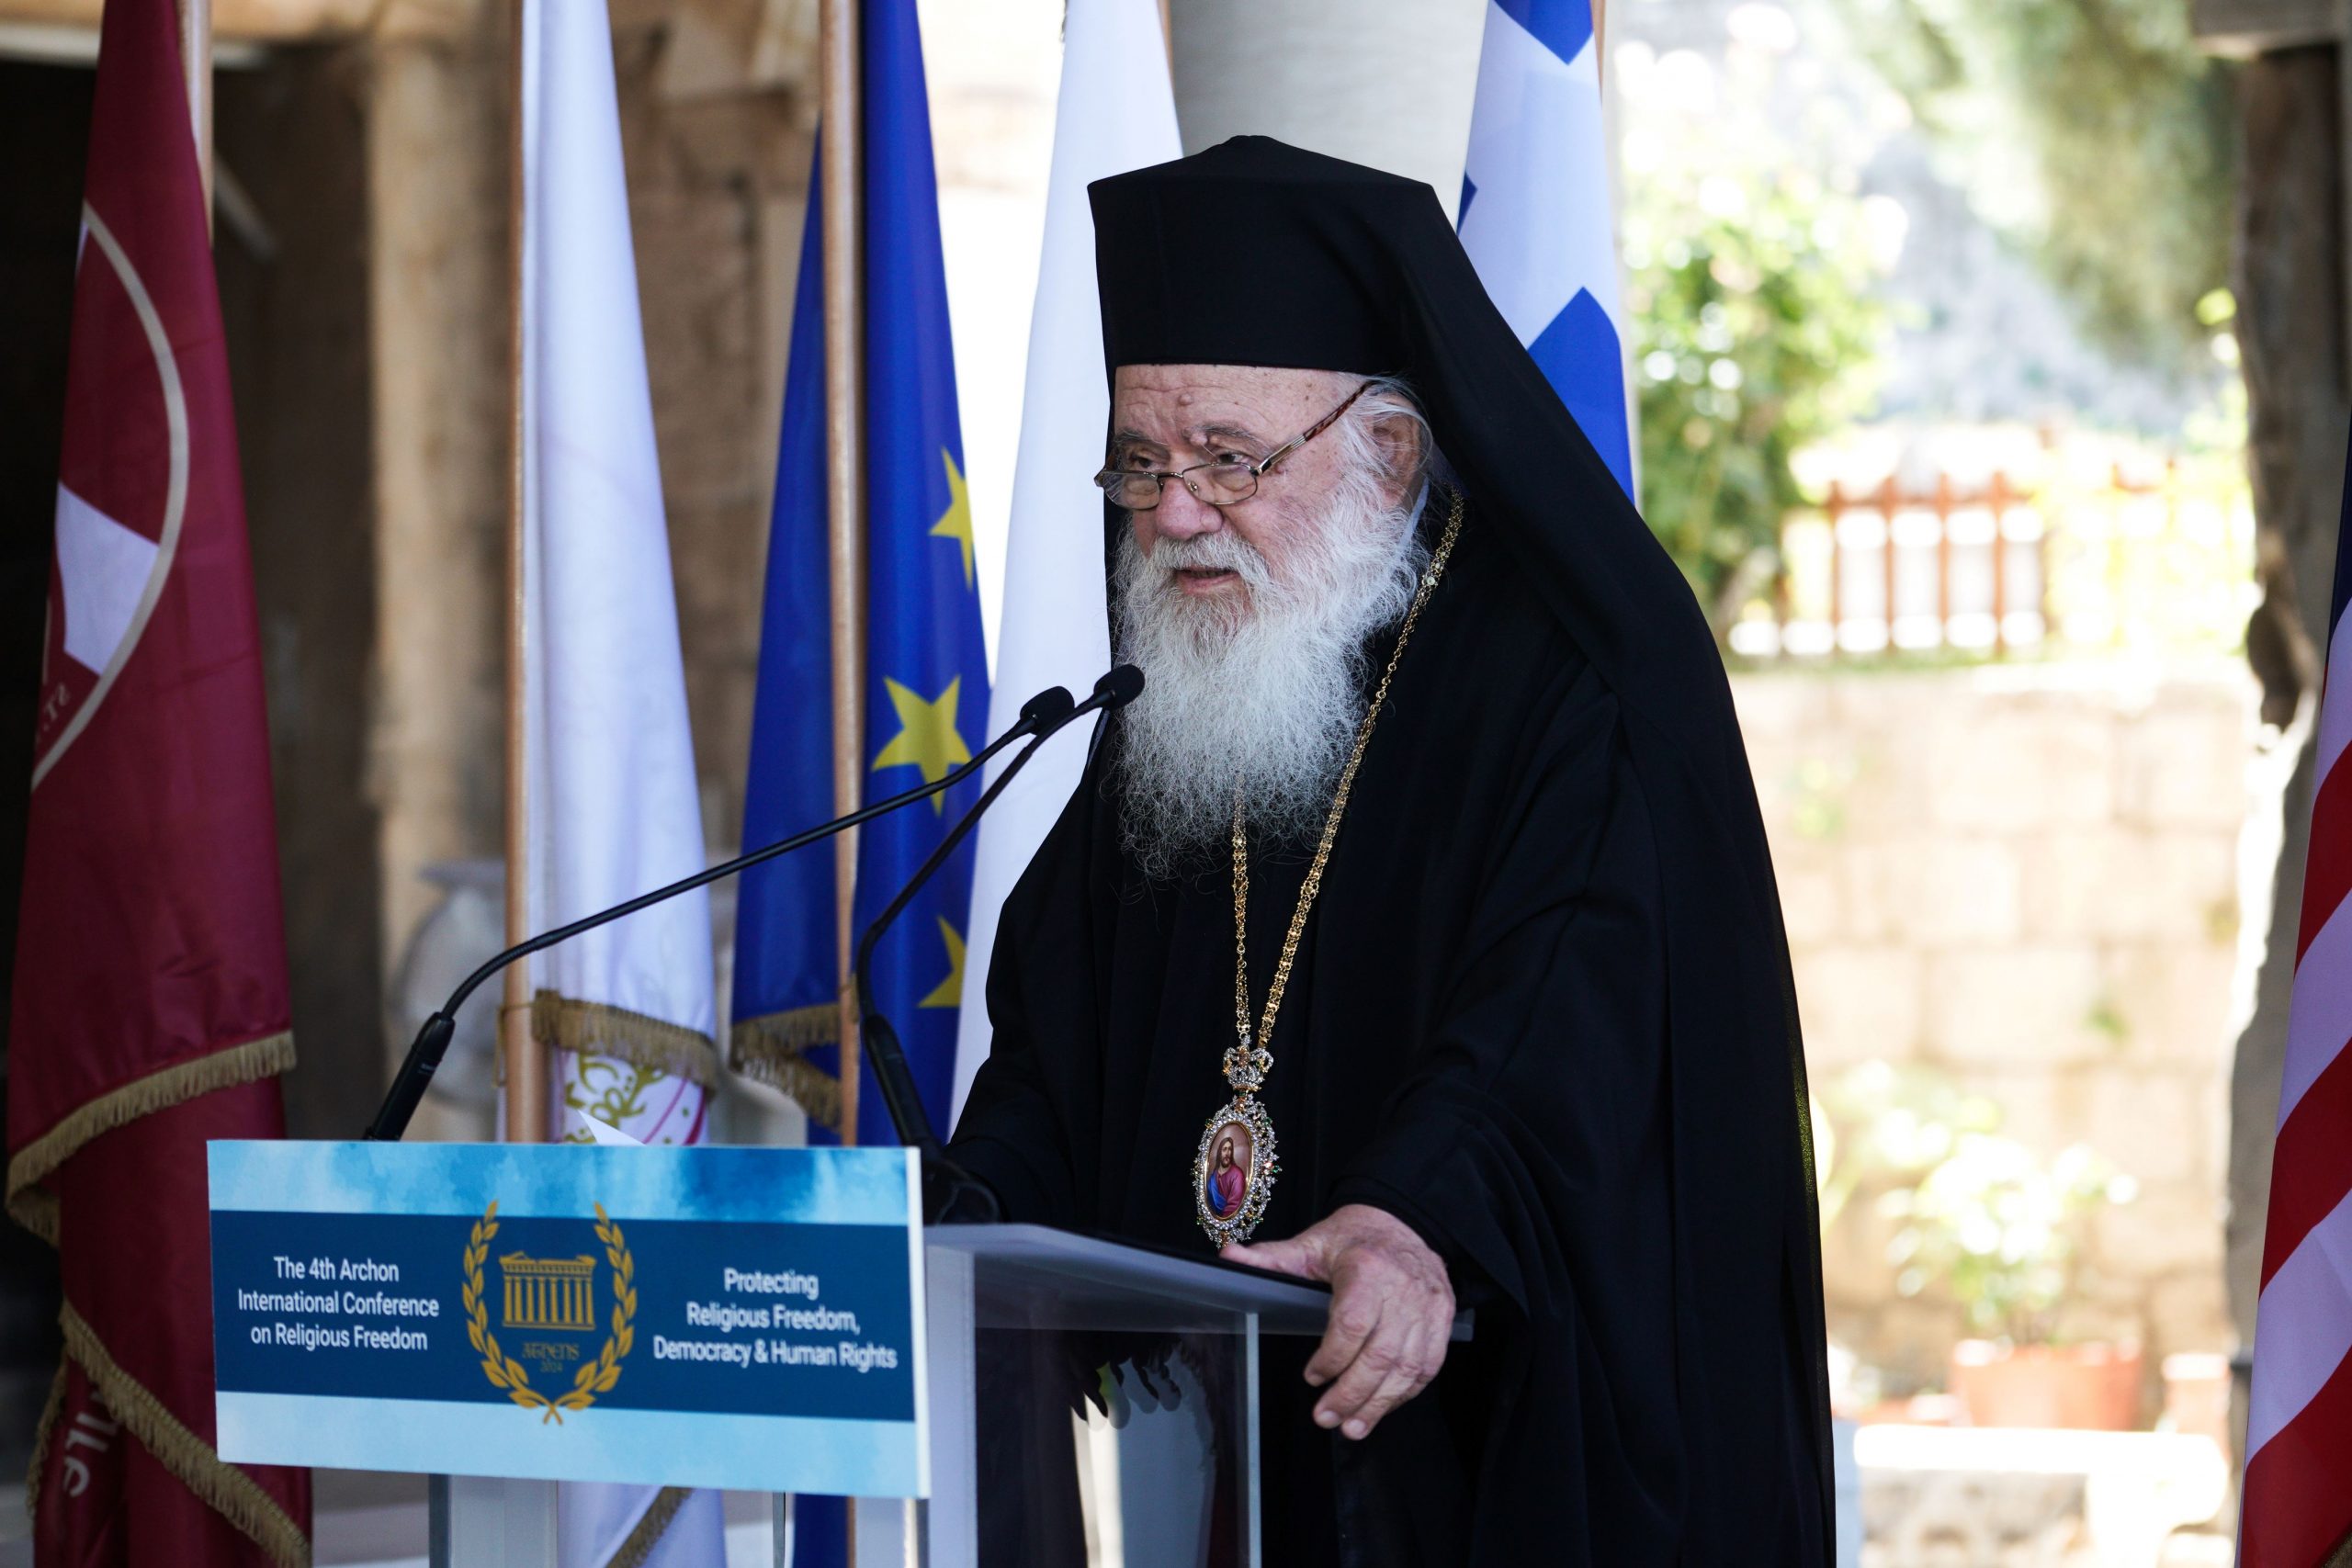 4th Archon Int’l Con’f on Religious Freedom in Athens